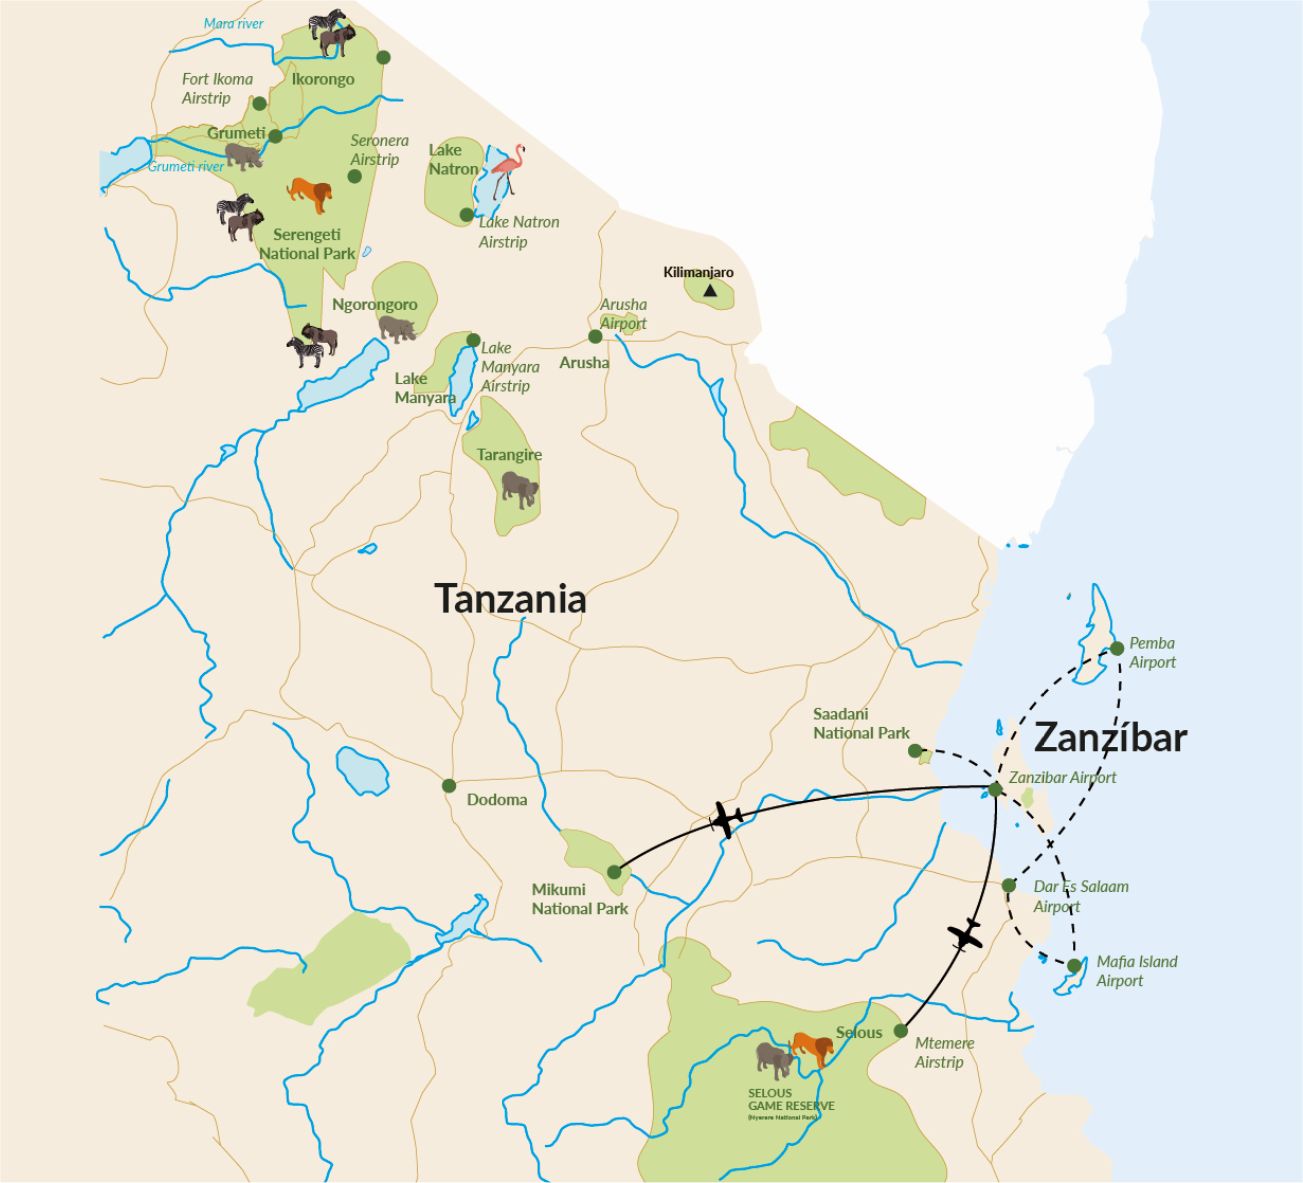 A schematic map of eastern Tanzania with fly-in Safari routes from Zanzibar to Mikumi National Park and Selous Game Reserve from the Zanzibar Archipelago